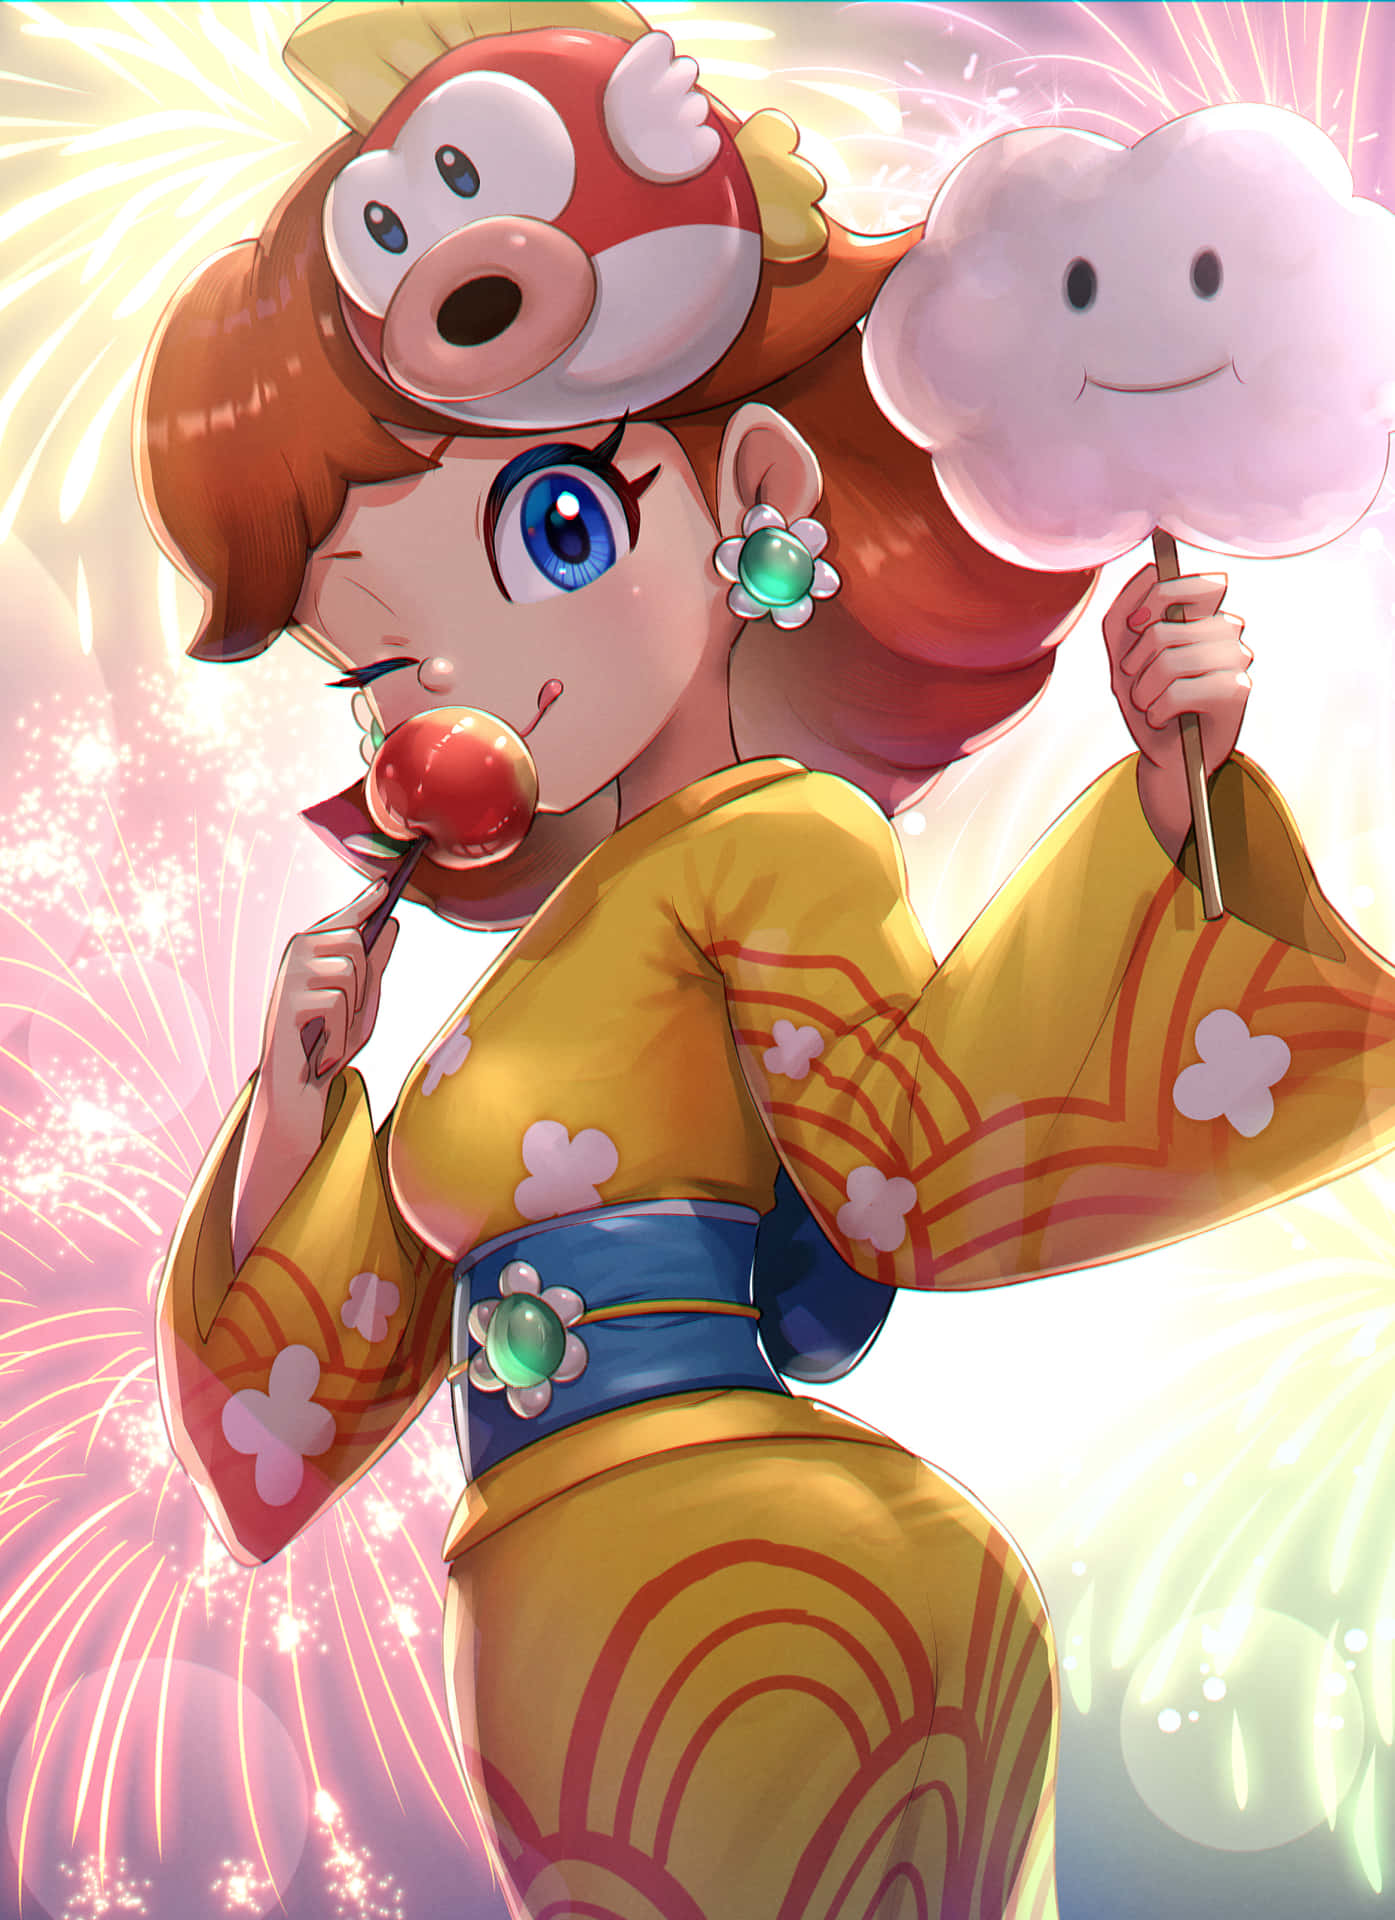 Princess Daisy in her signature dress, waving with a smile Wallpaper